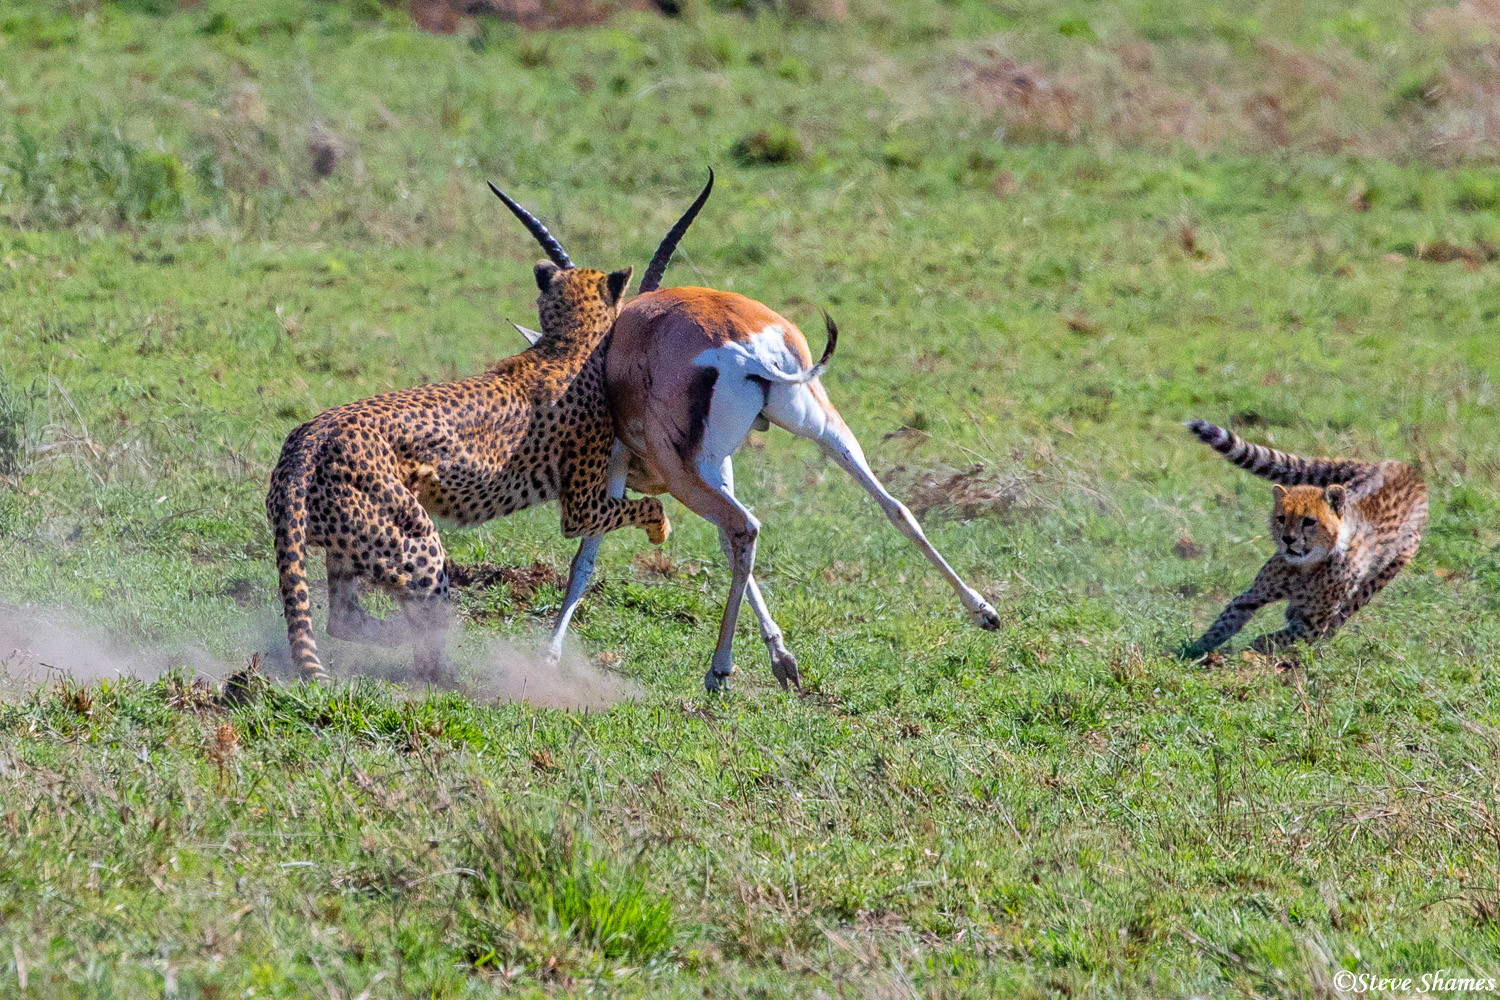 The mother cheetah tries to wrestle the grant's gazelle to the ground, while the cub comes in to lend a helping paw.